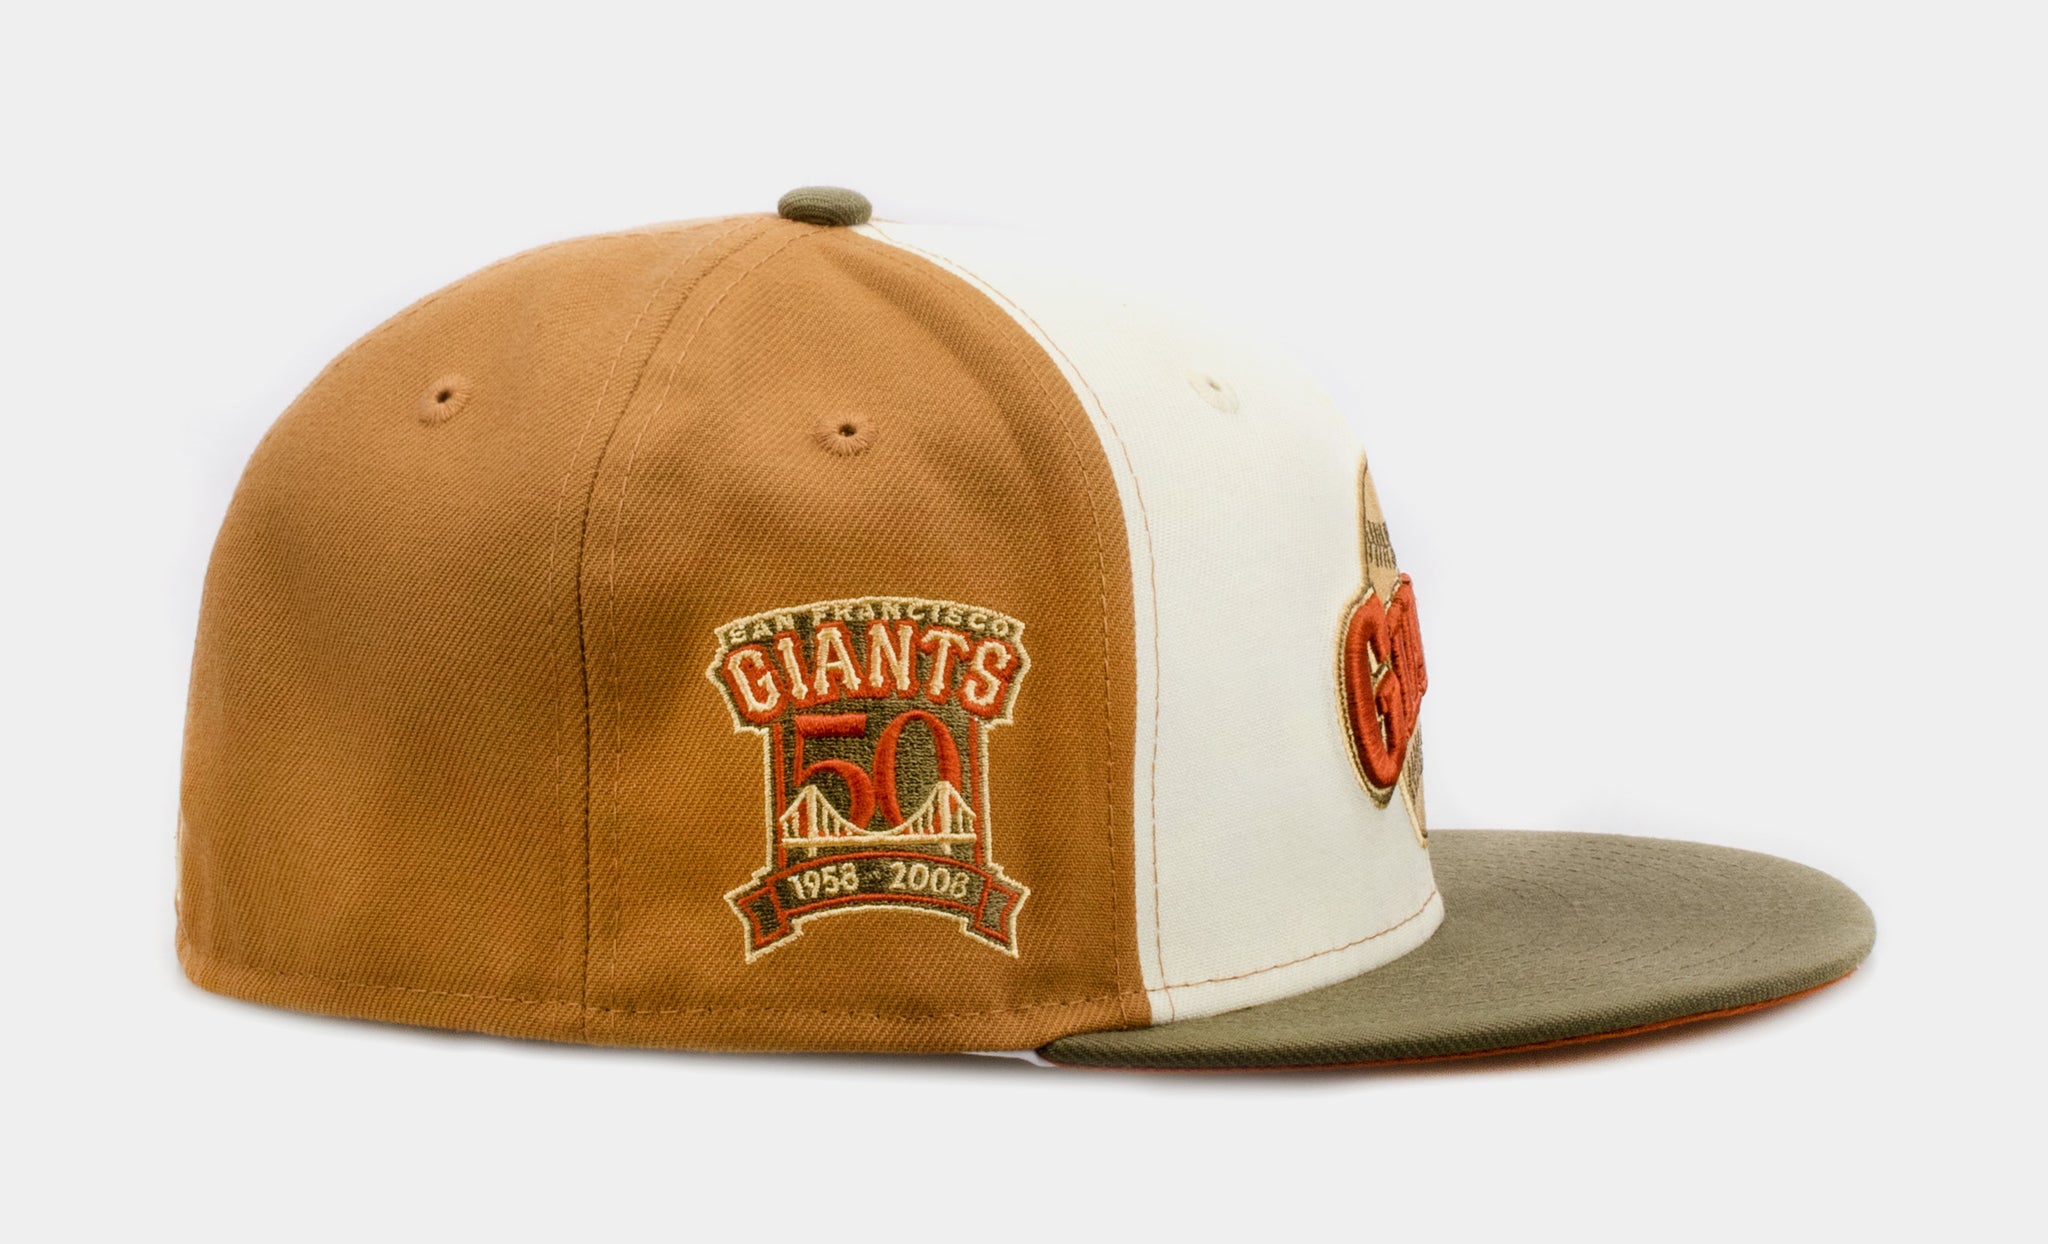 New Era 59FIFTY San Francisco Giants Mexico Black Orange Fitted Hat